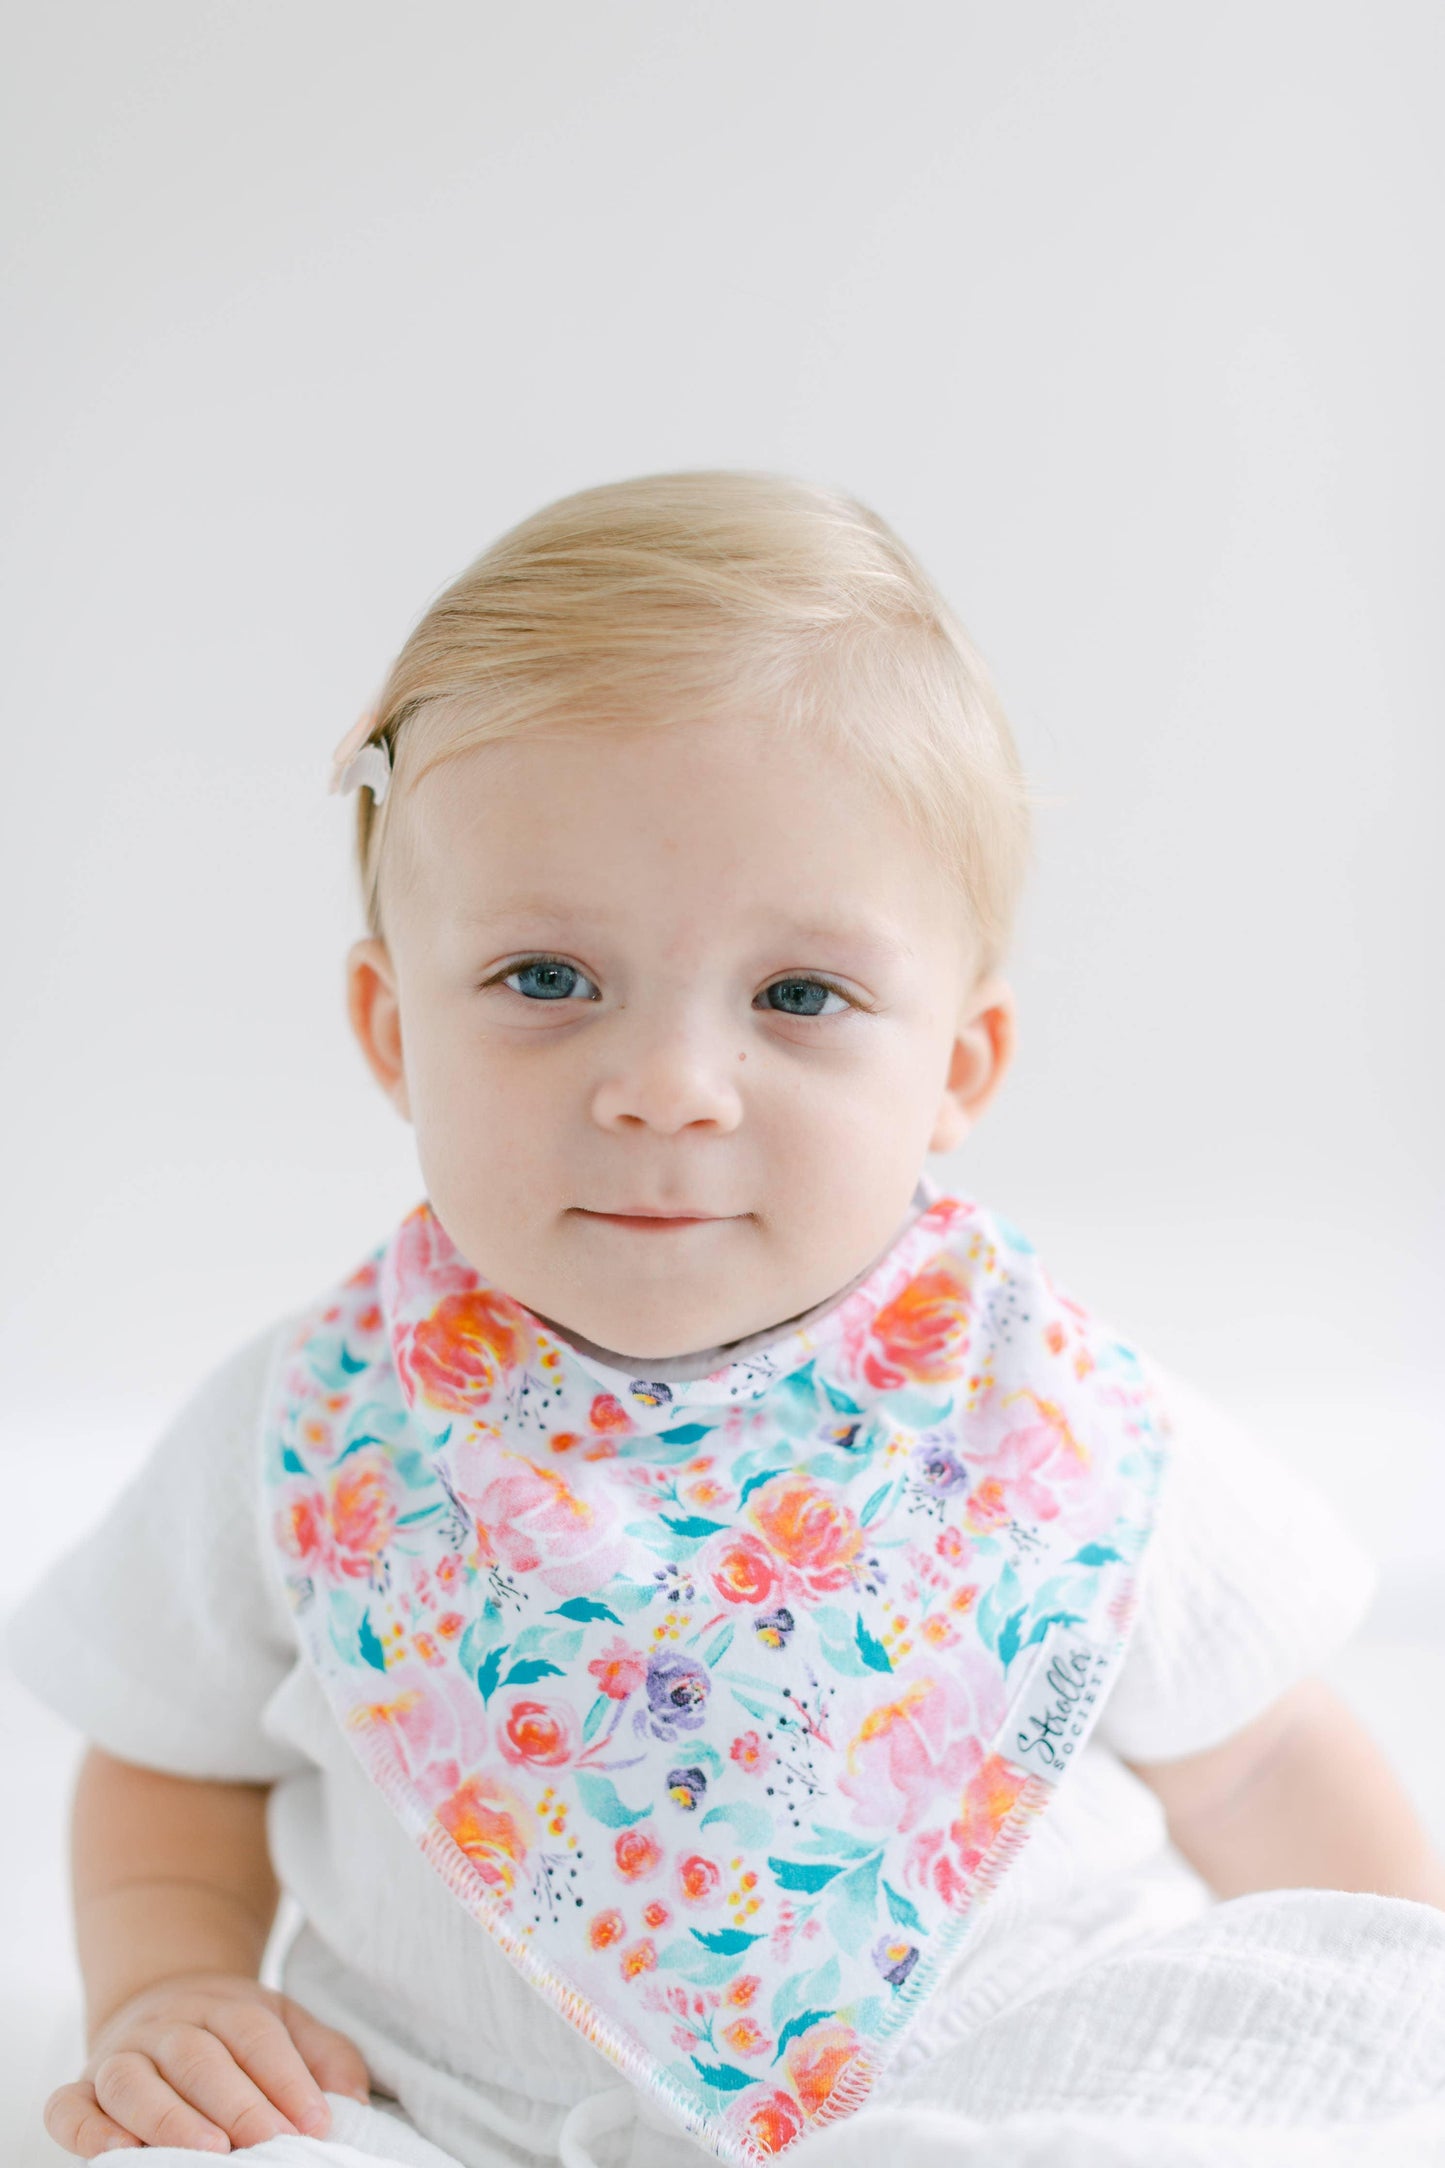 Baby Bandana Bibs - Flowers, Hearts and Bows baby essentials Maple & Co. Boutique   